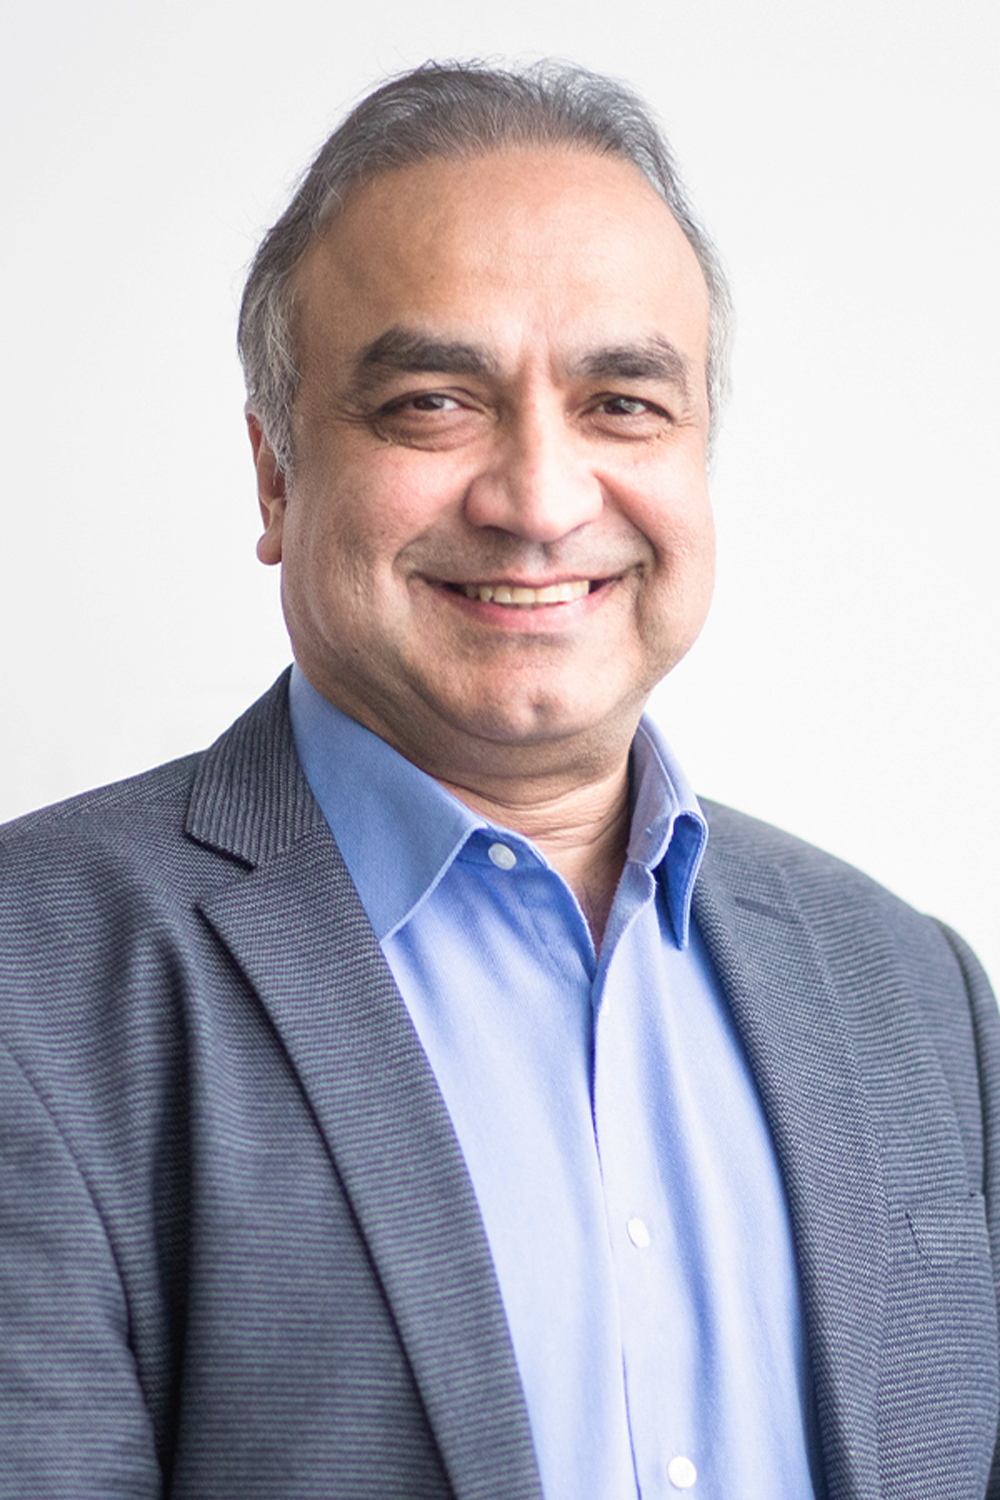 Nouman Mufti, Senior Vice President of Professional Services